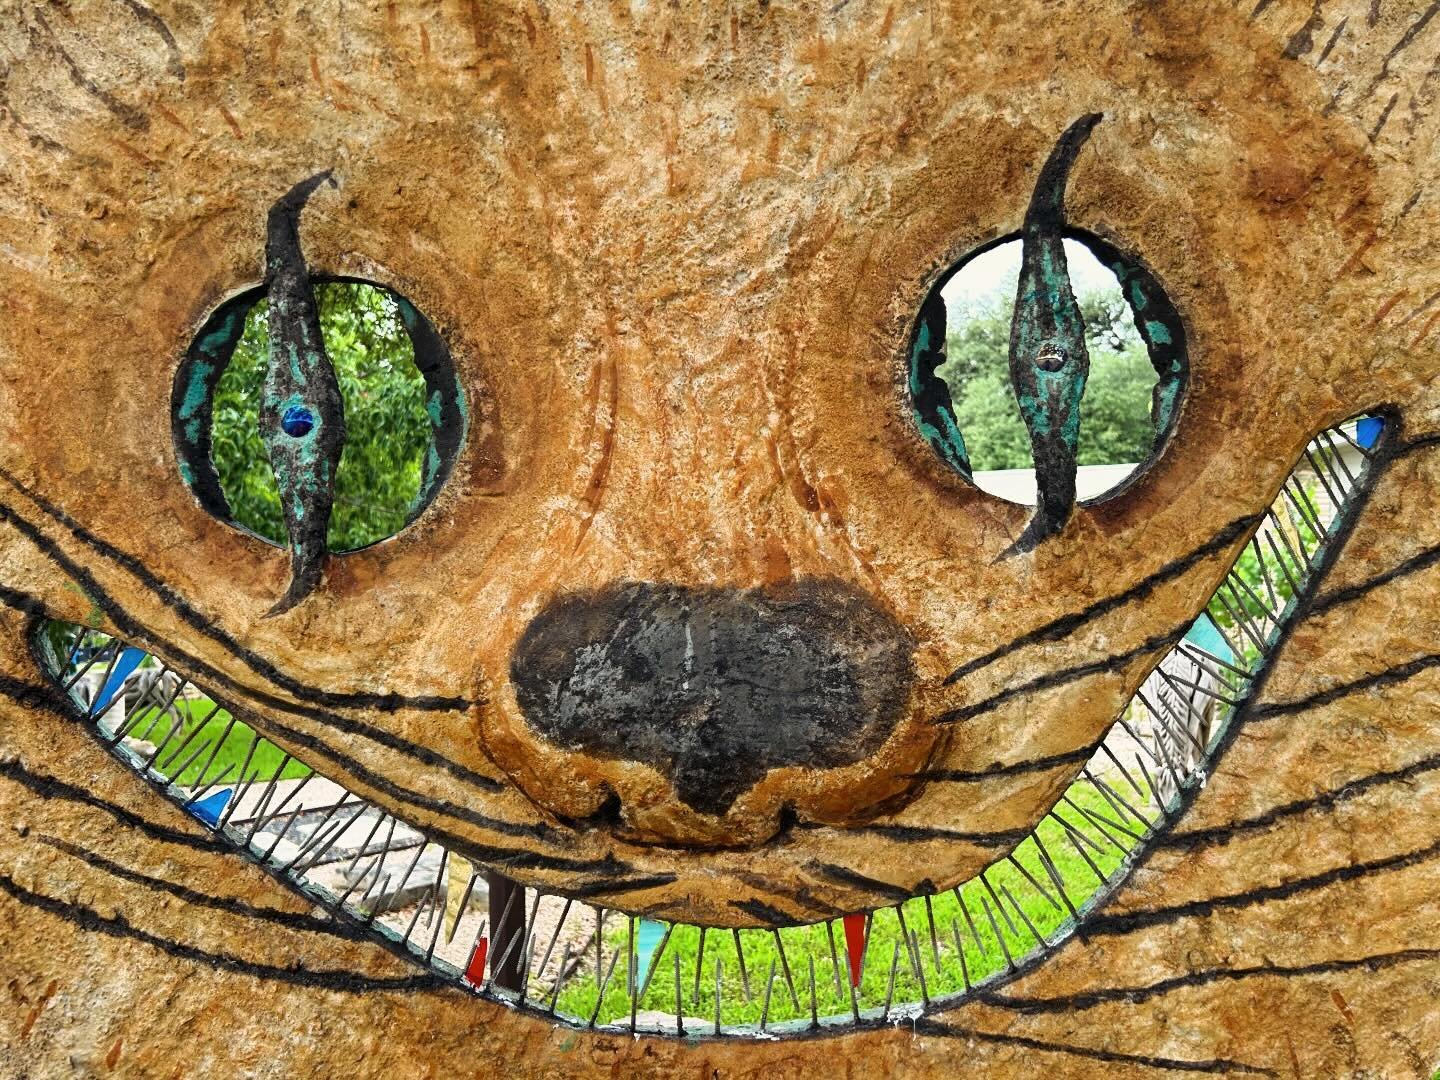 A Happy Mother&rsquo;s Day and a big Cheshire Cat smile to everyone from the folks at Solstice Outdoors!  Open today till 5 pm.  #solsticeoutdoors #plantnursery #artgallery #sculpturegarden #handcrafts #nativeandadaptedplants #texasplants #hillcountr